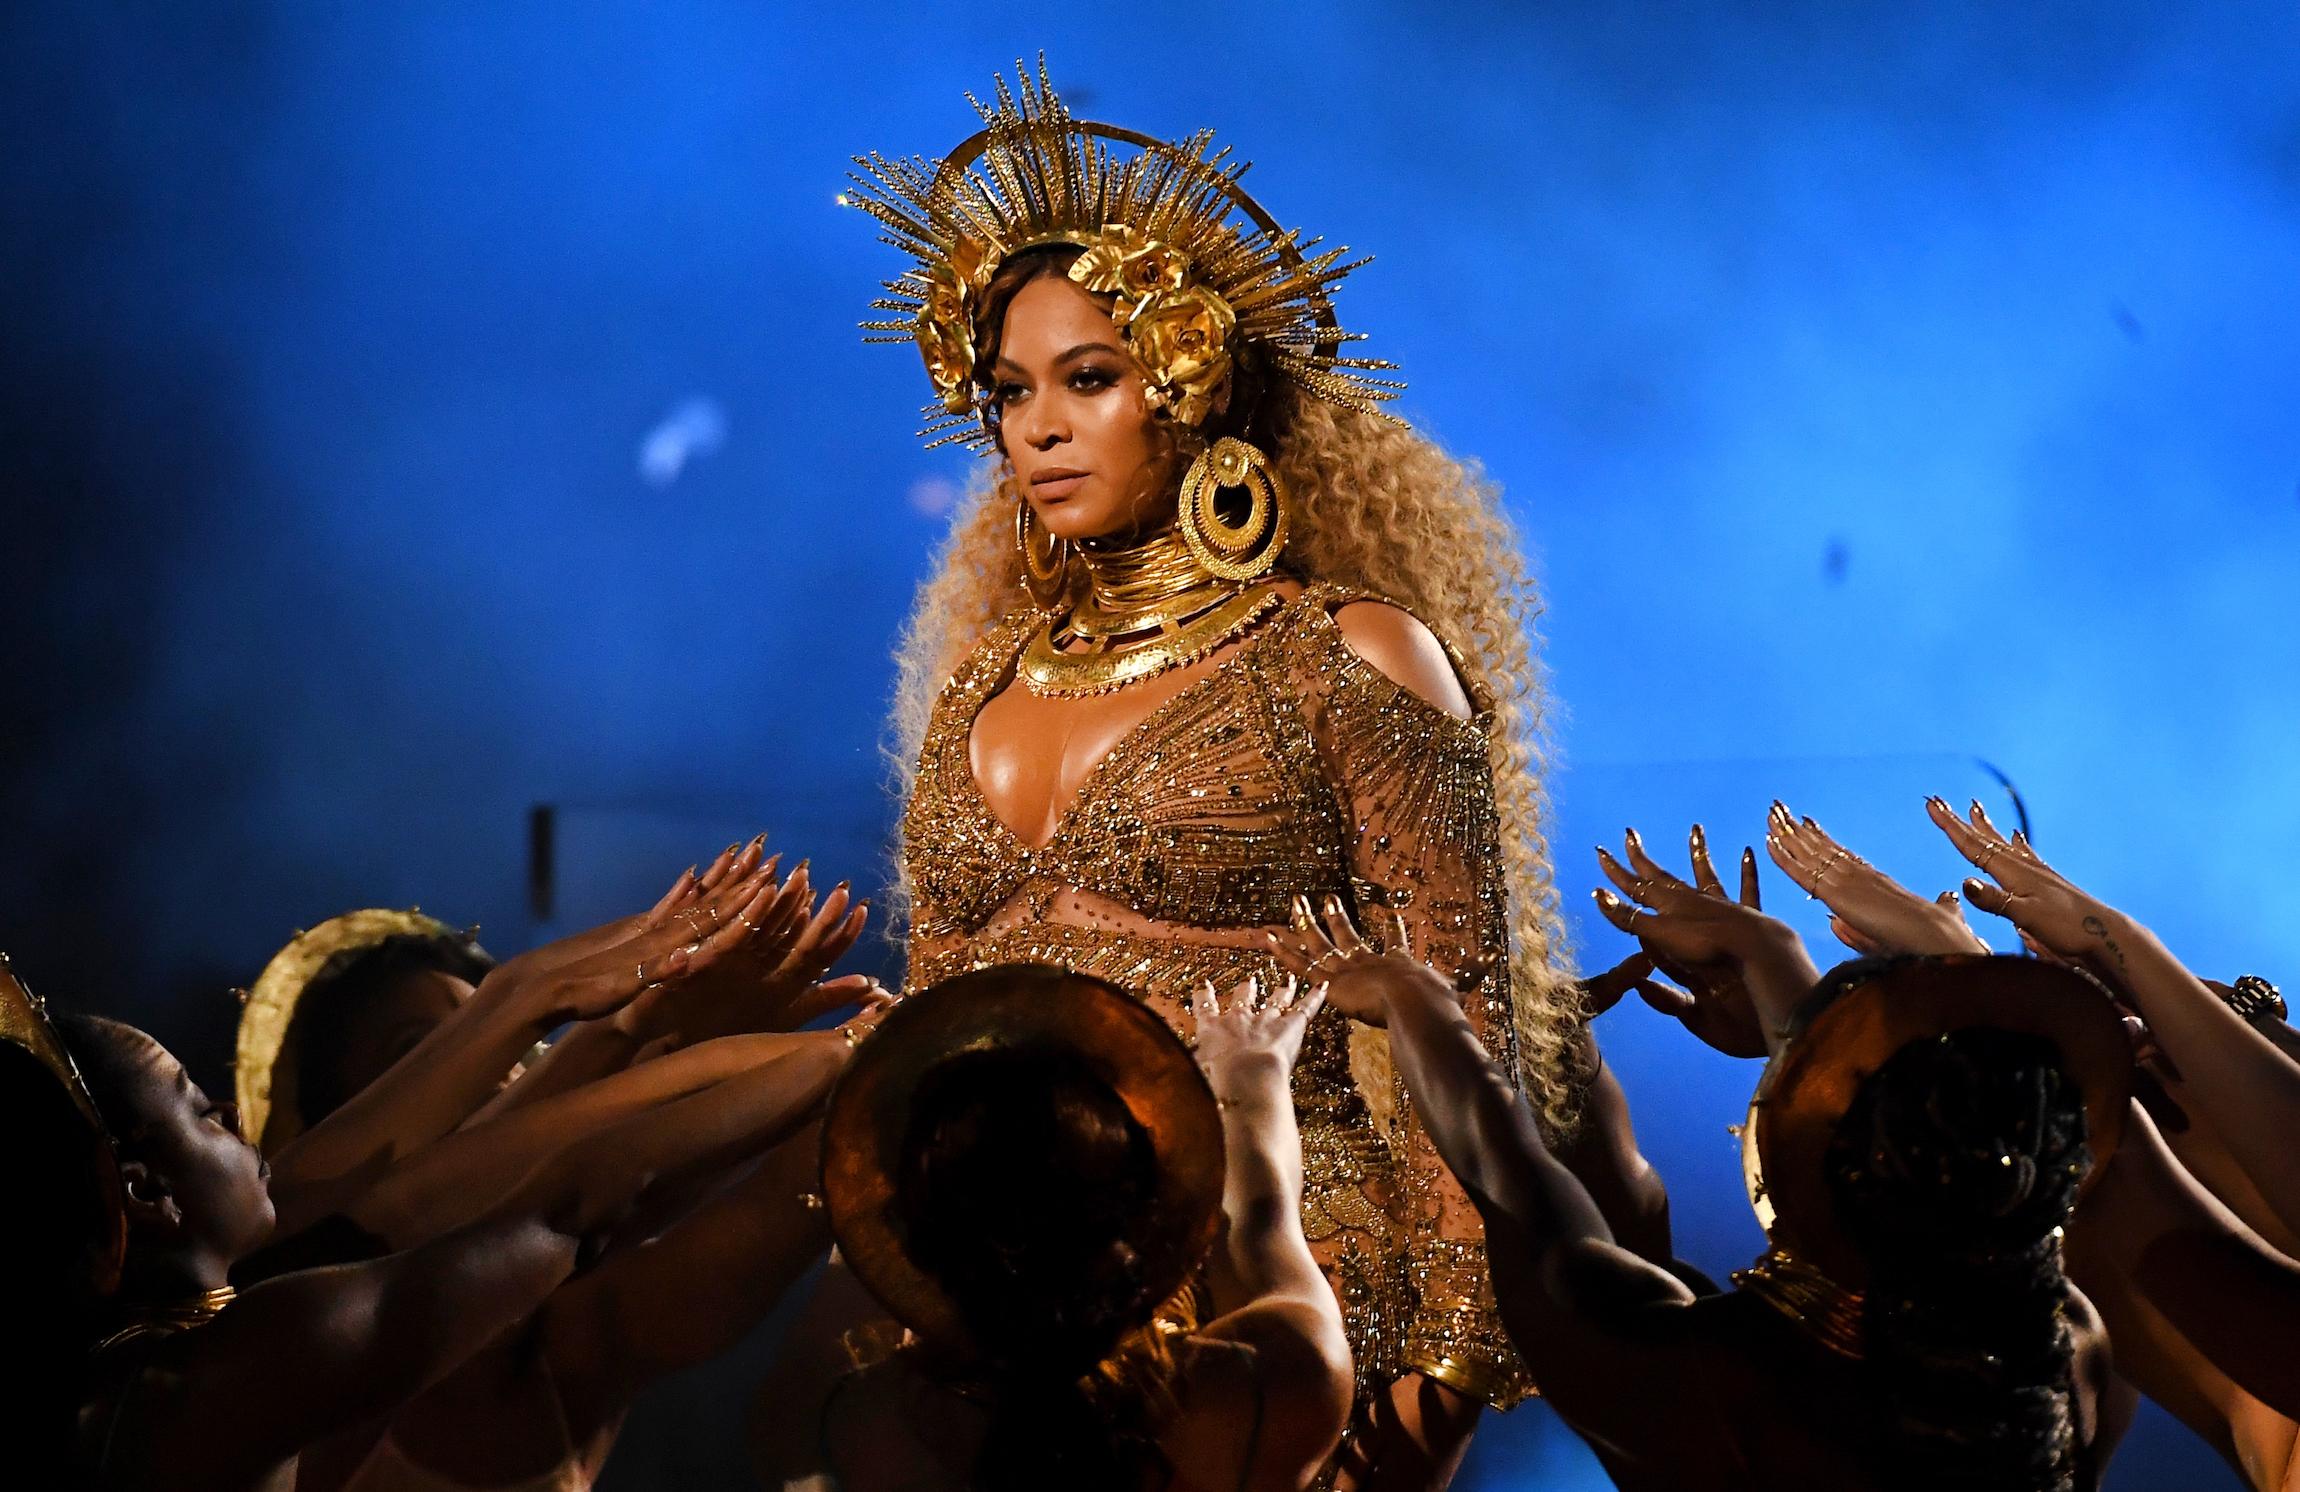 Beyoncé performs while heavily pregnant at the 59th Grammy Awards in Los Angeles earlier this year